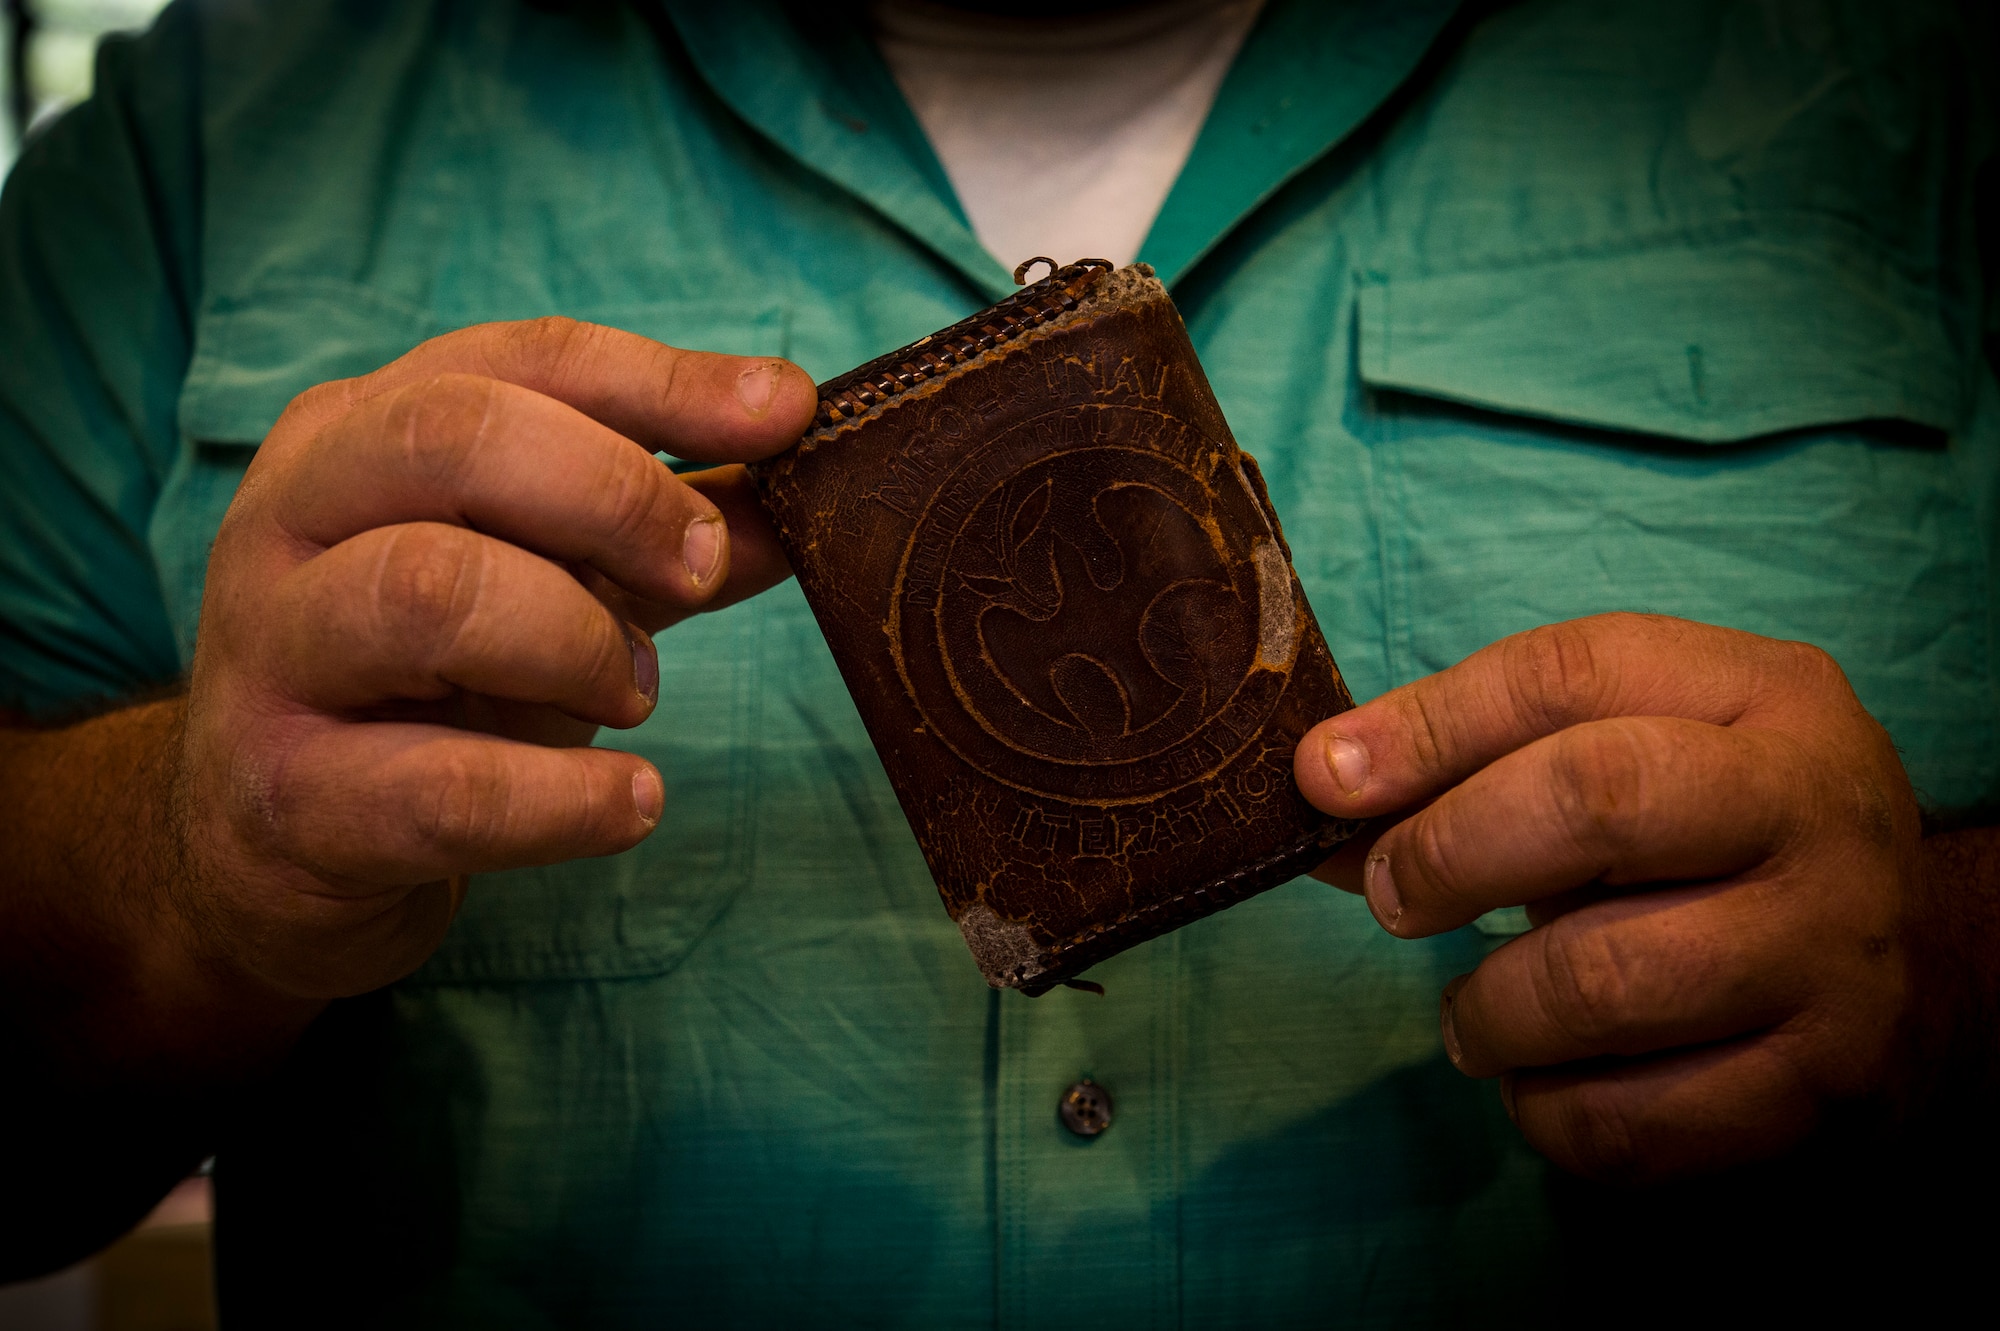 Former Army Sgt. Tony Fantasia displays the wallet that he attributes saving his life at his shop in San Antonio, Texas, June 29th, 2018. Working with leather has aided Fantasia’s battle with PTSD that he developed after his deployments to Southwest Asia as a medic. He now runs an outreach program for veterans focusing on various artistic outlets. (U.S. Air Force photo by Senior Airman Keifer Bowes)